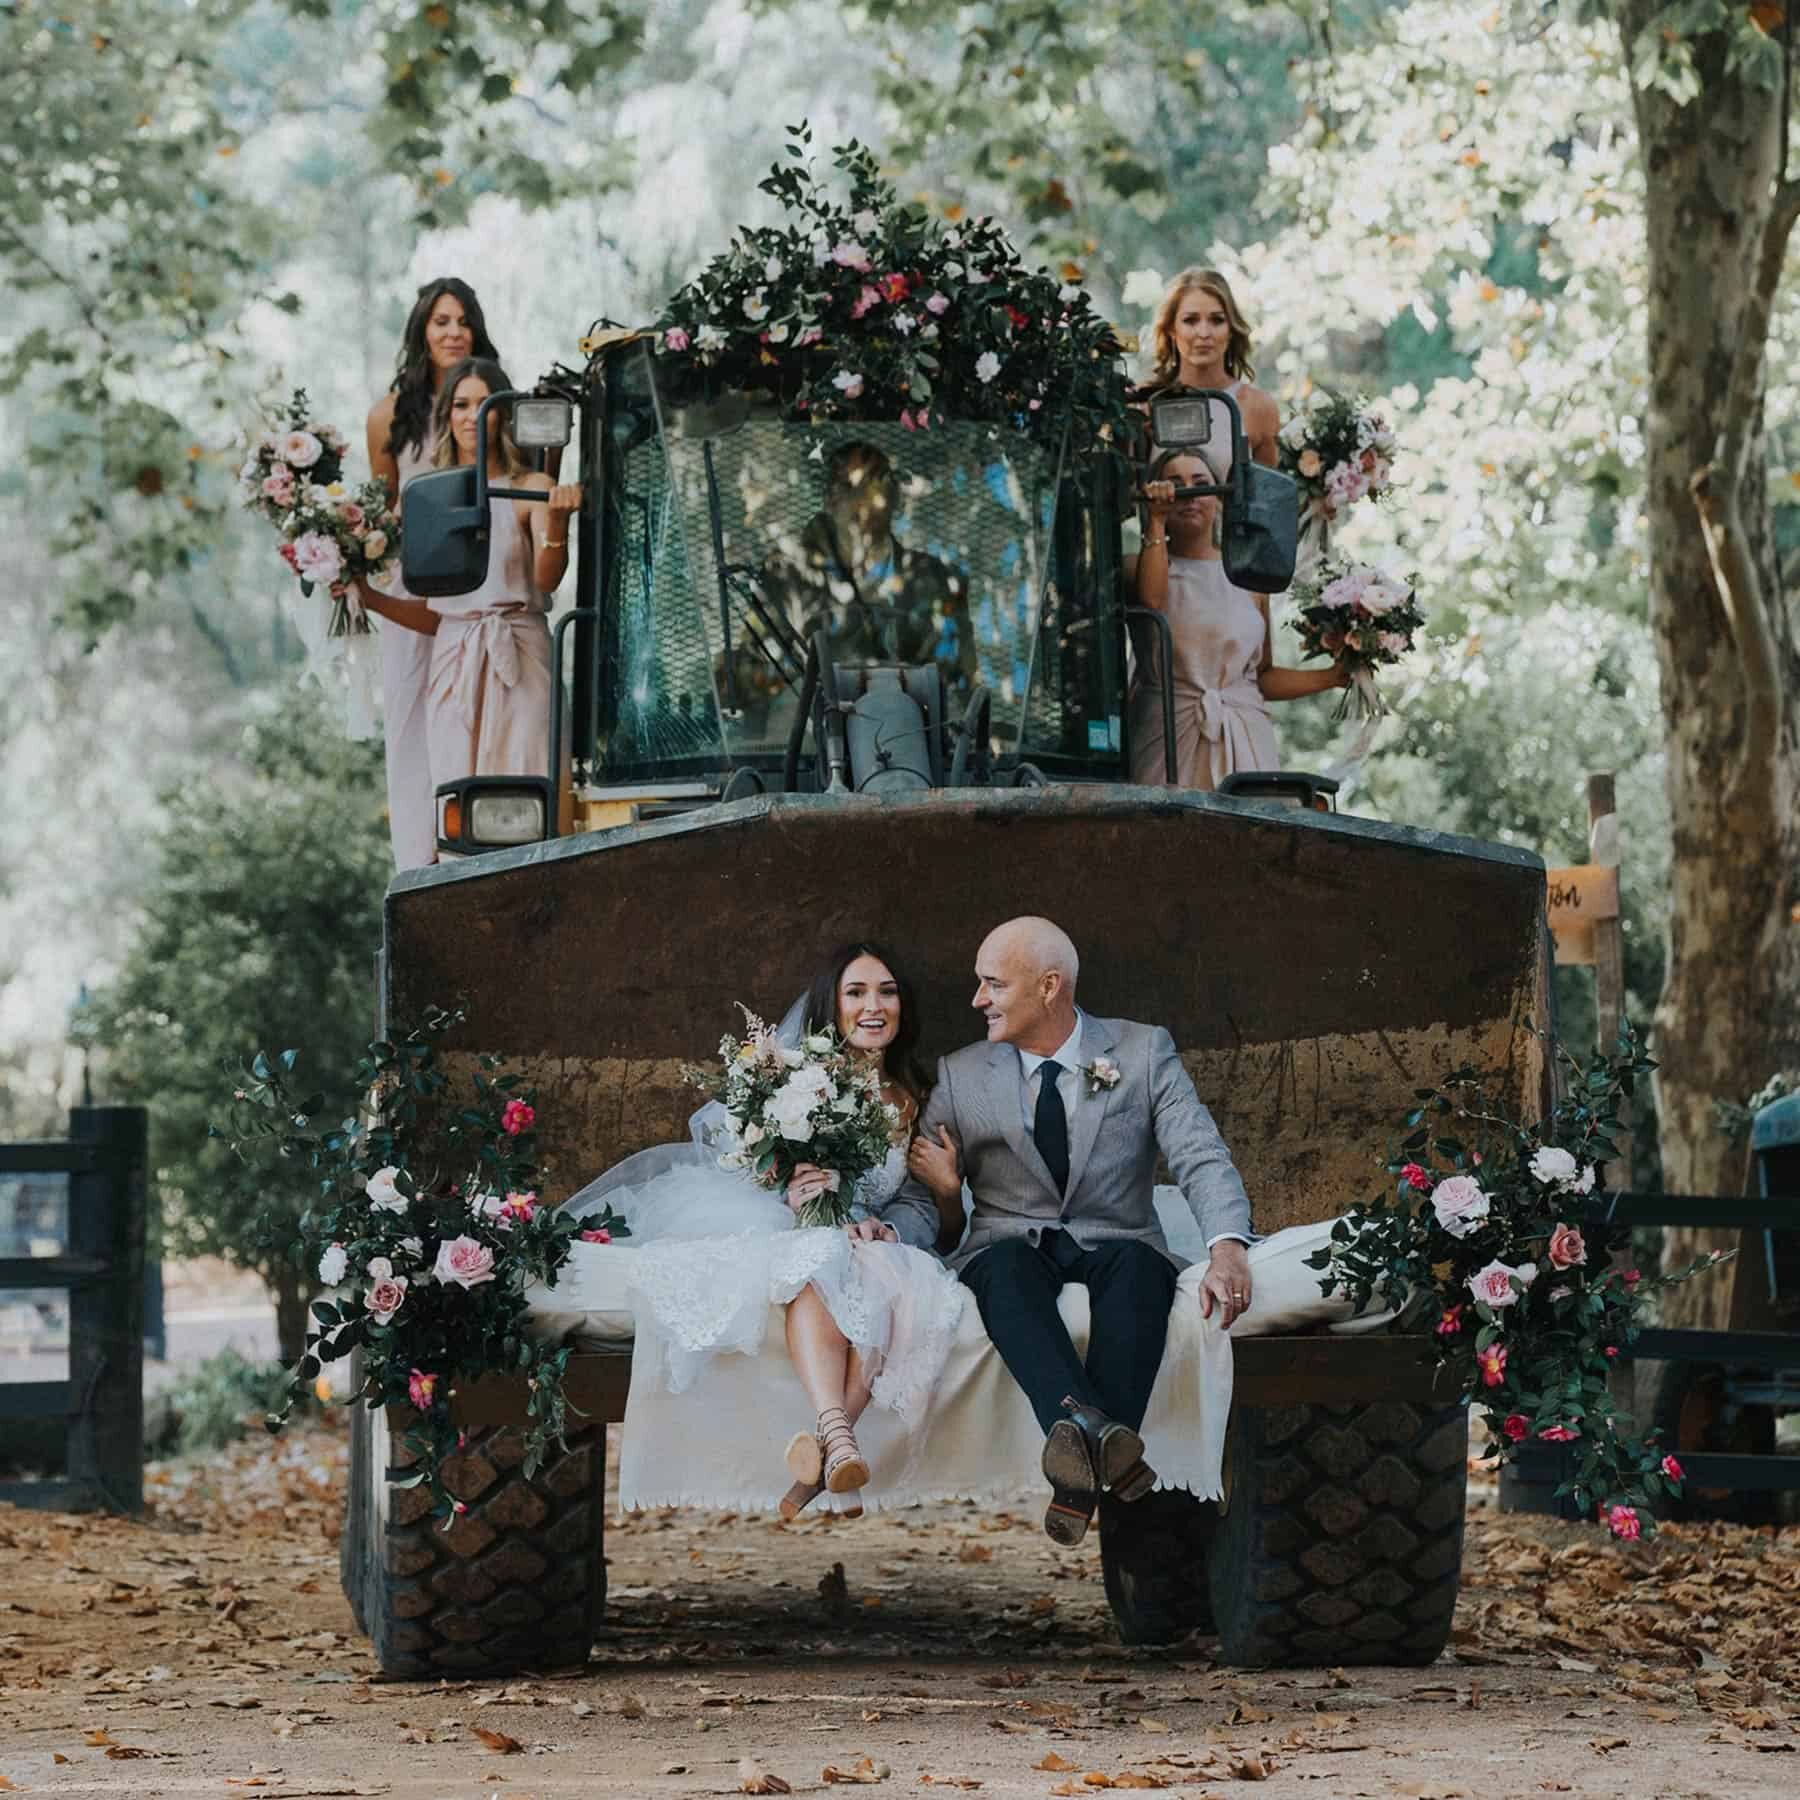 bridal party arriving on a flower-laden tractor